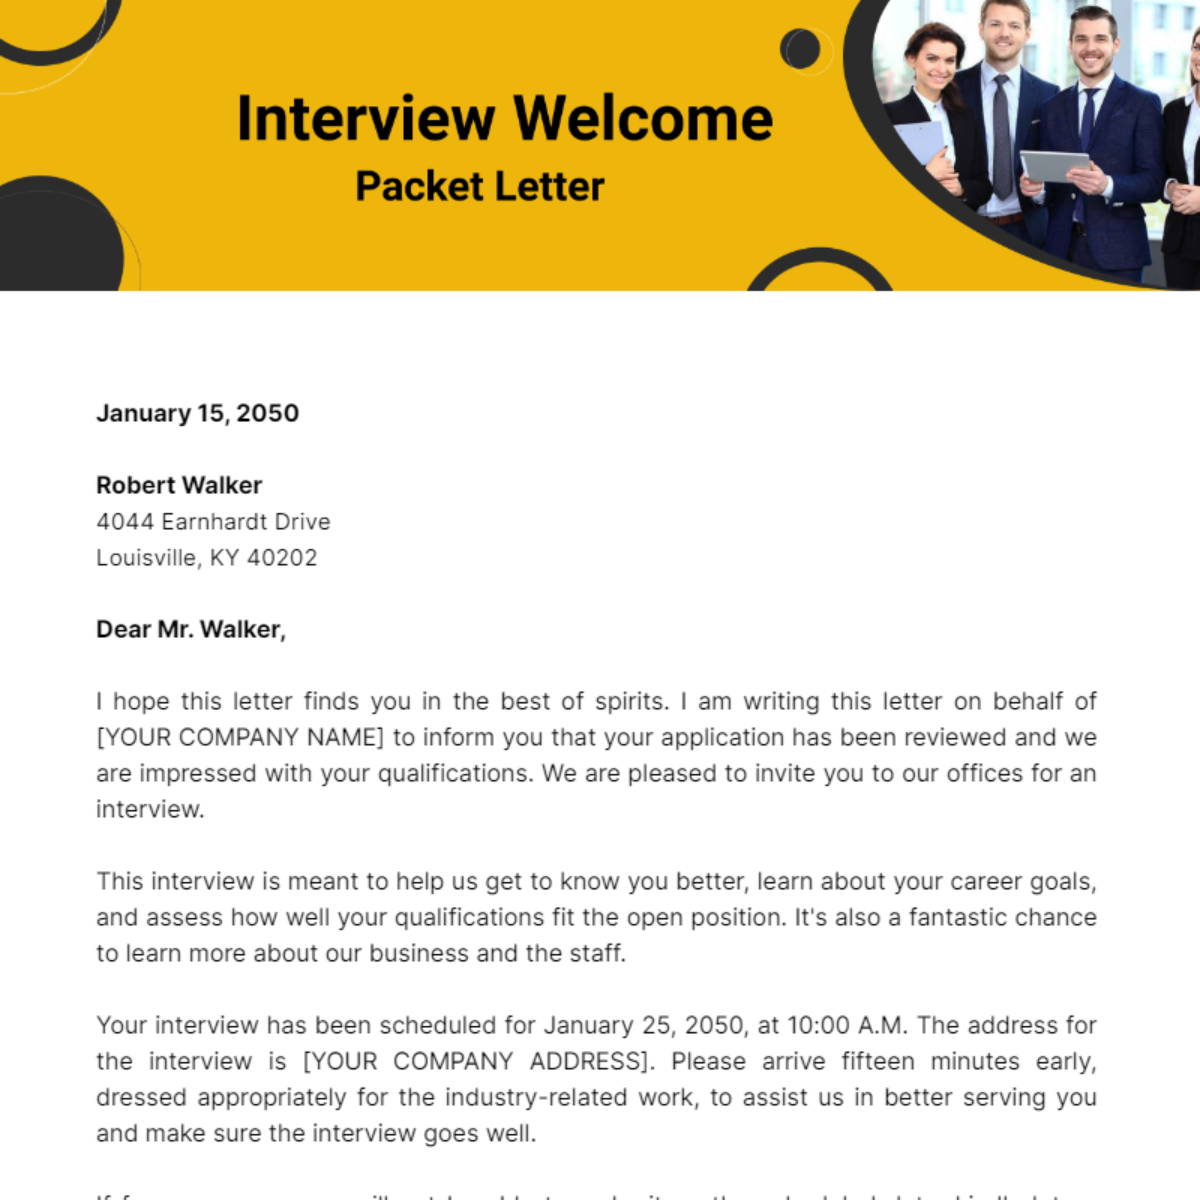 Interview Welcome Packet Letter Template